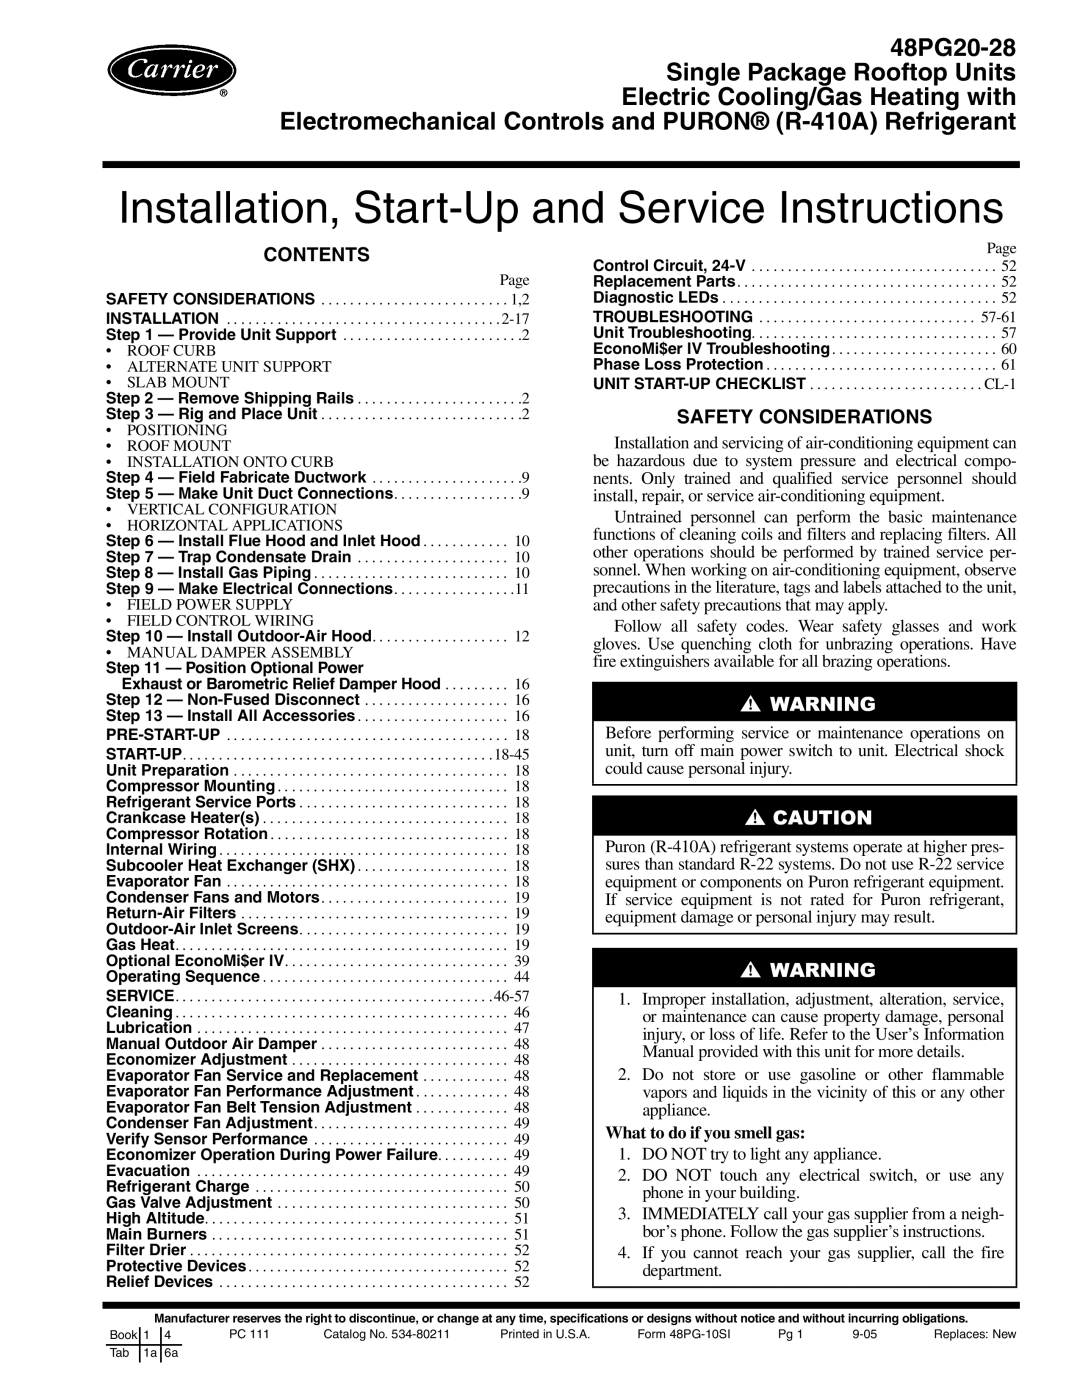 Carrier 48PG20-28 specifications Installation, Start-Upand Service Instructions, Contents, Safety Considerations 